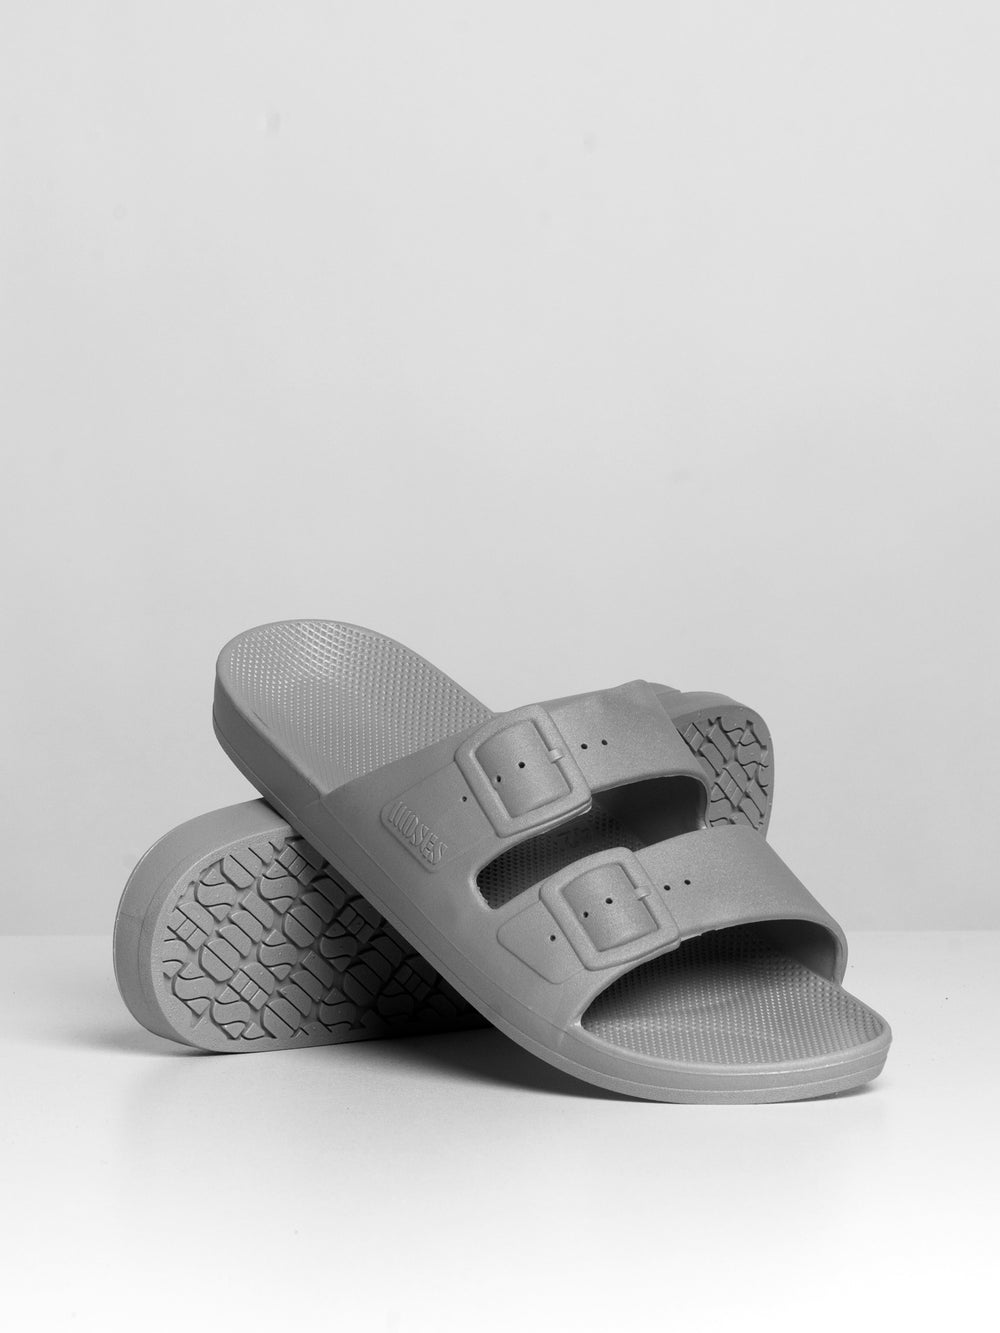 MENS FREEDOM MOSES GREY SANDAL - CLEARANCE